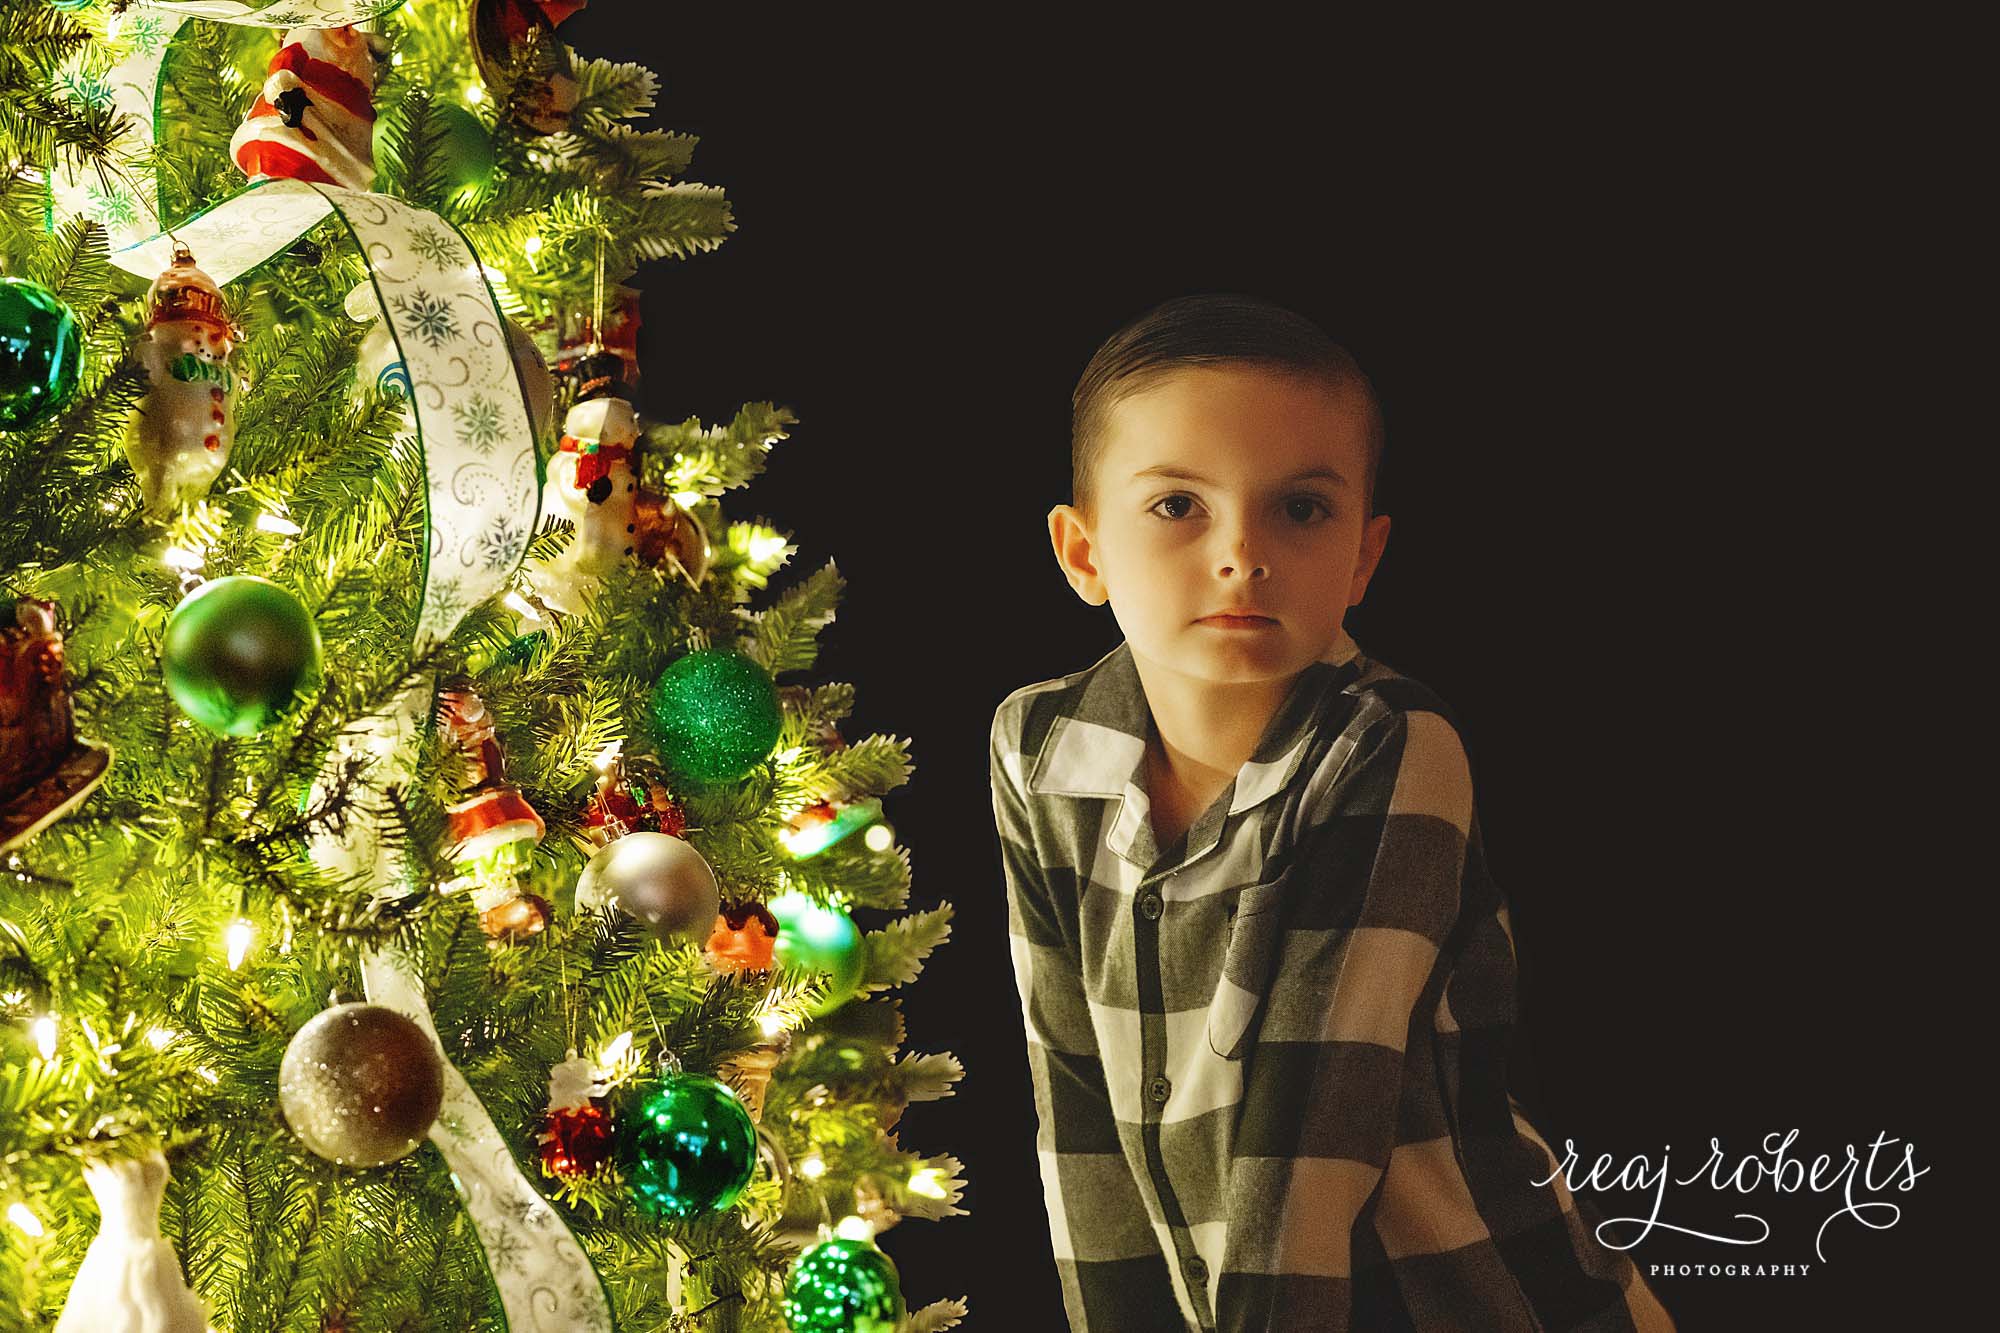 Christmas tree photos | Simply Sparkle Sessions by Reaj Roberts Photography